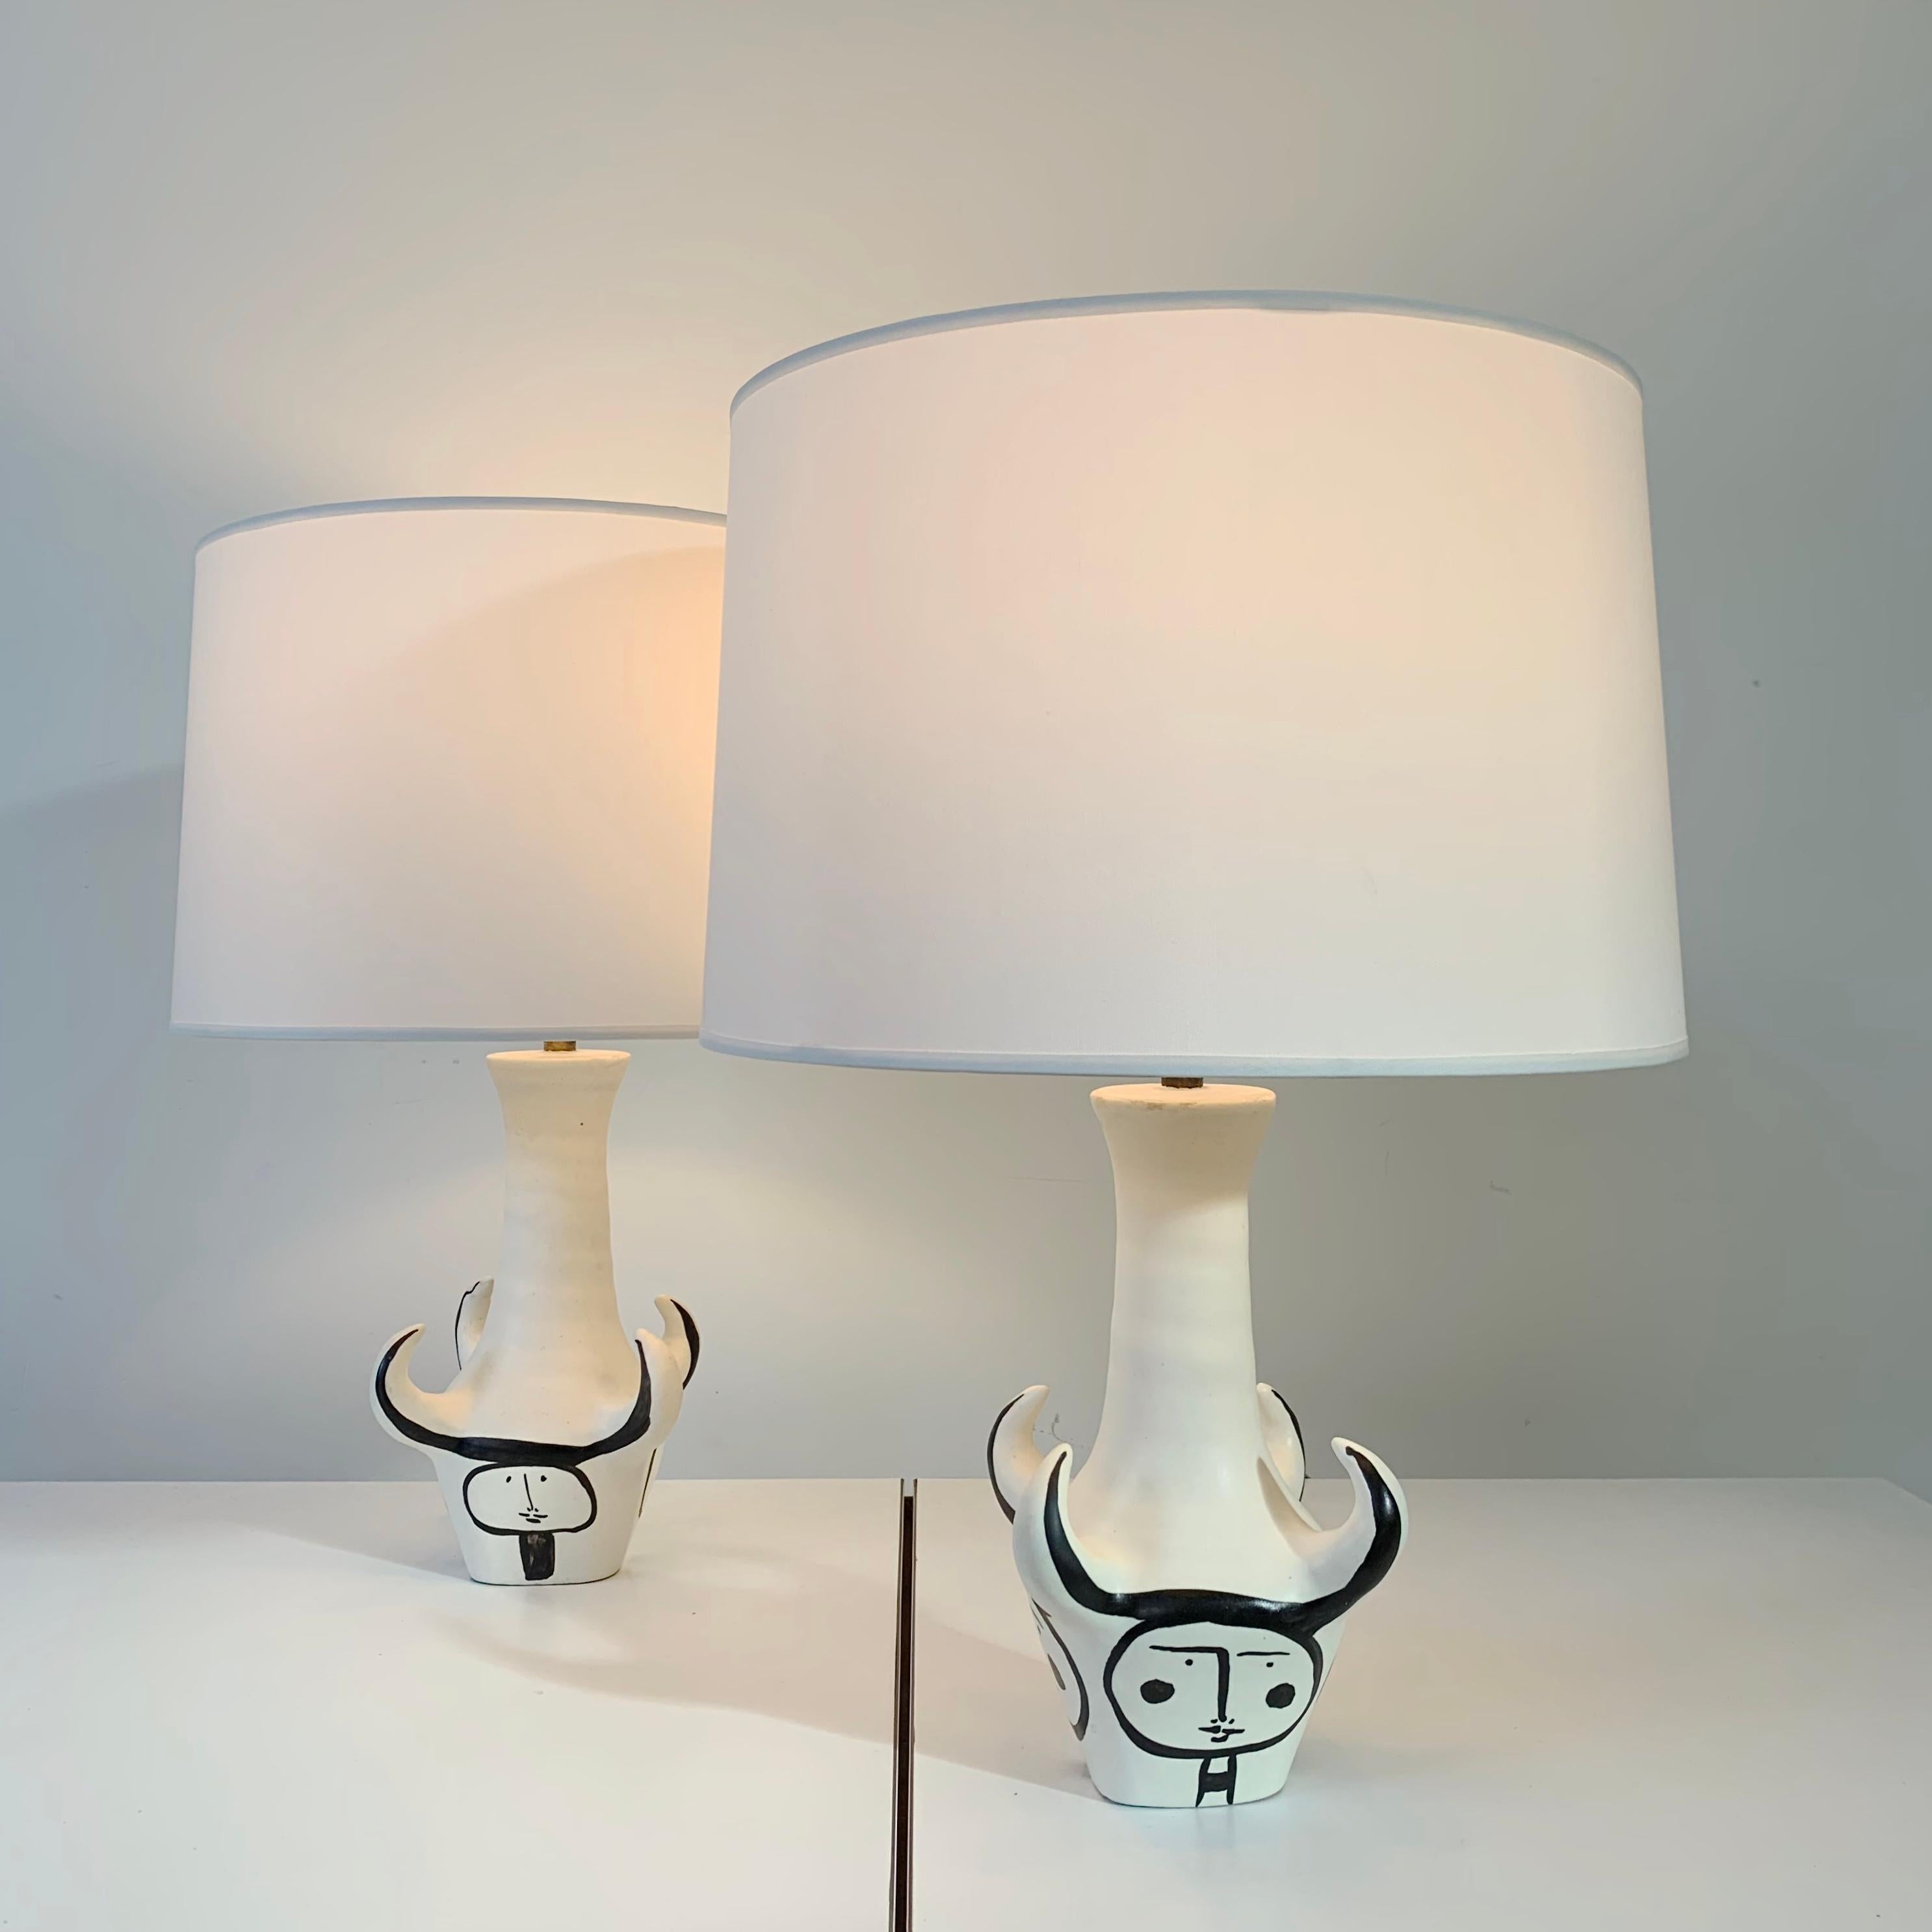 Mid-20th Century  Roger Capron Pair Of 4 Horns Signed Ceramic Table Lamps , circa 1955, France. For Sale